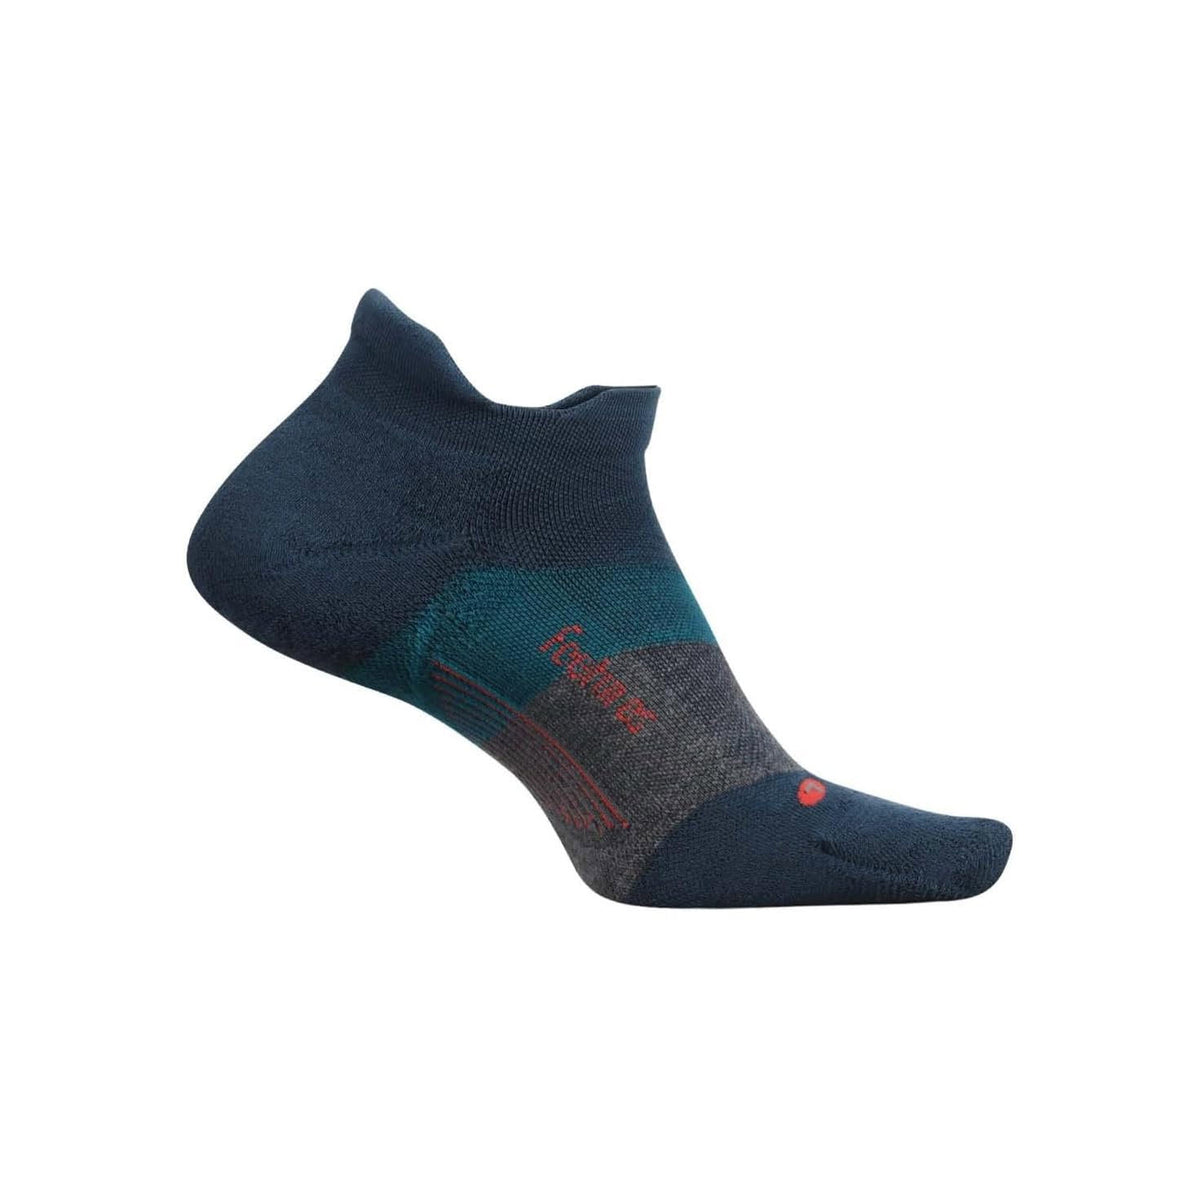 A low-cut athletic sock with arch support in dark blue with teal accents and red Feetures logo, displayed against a white background.